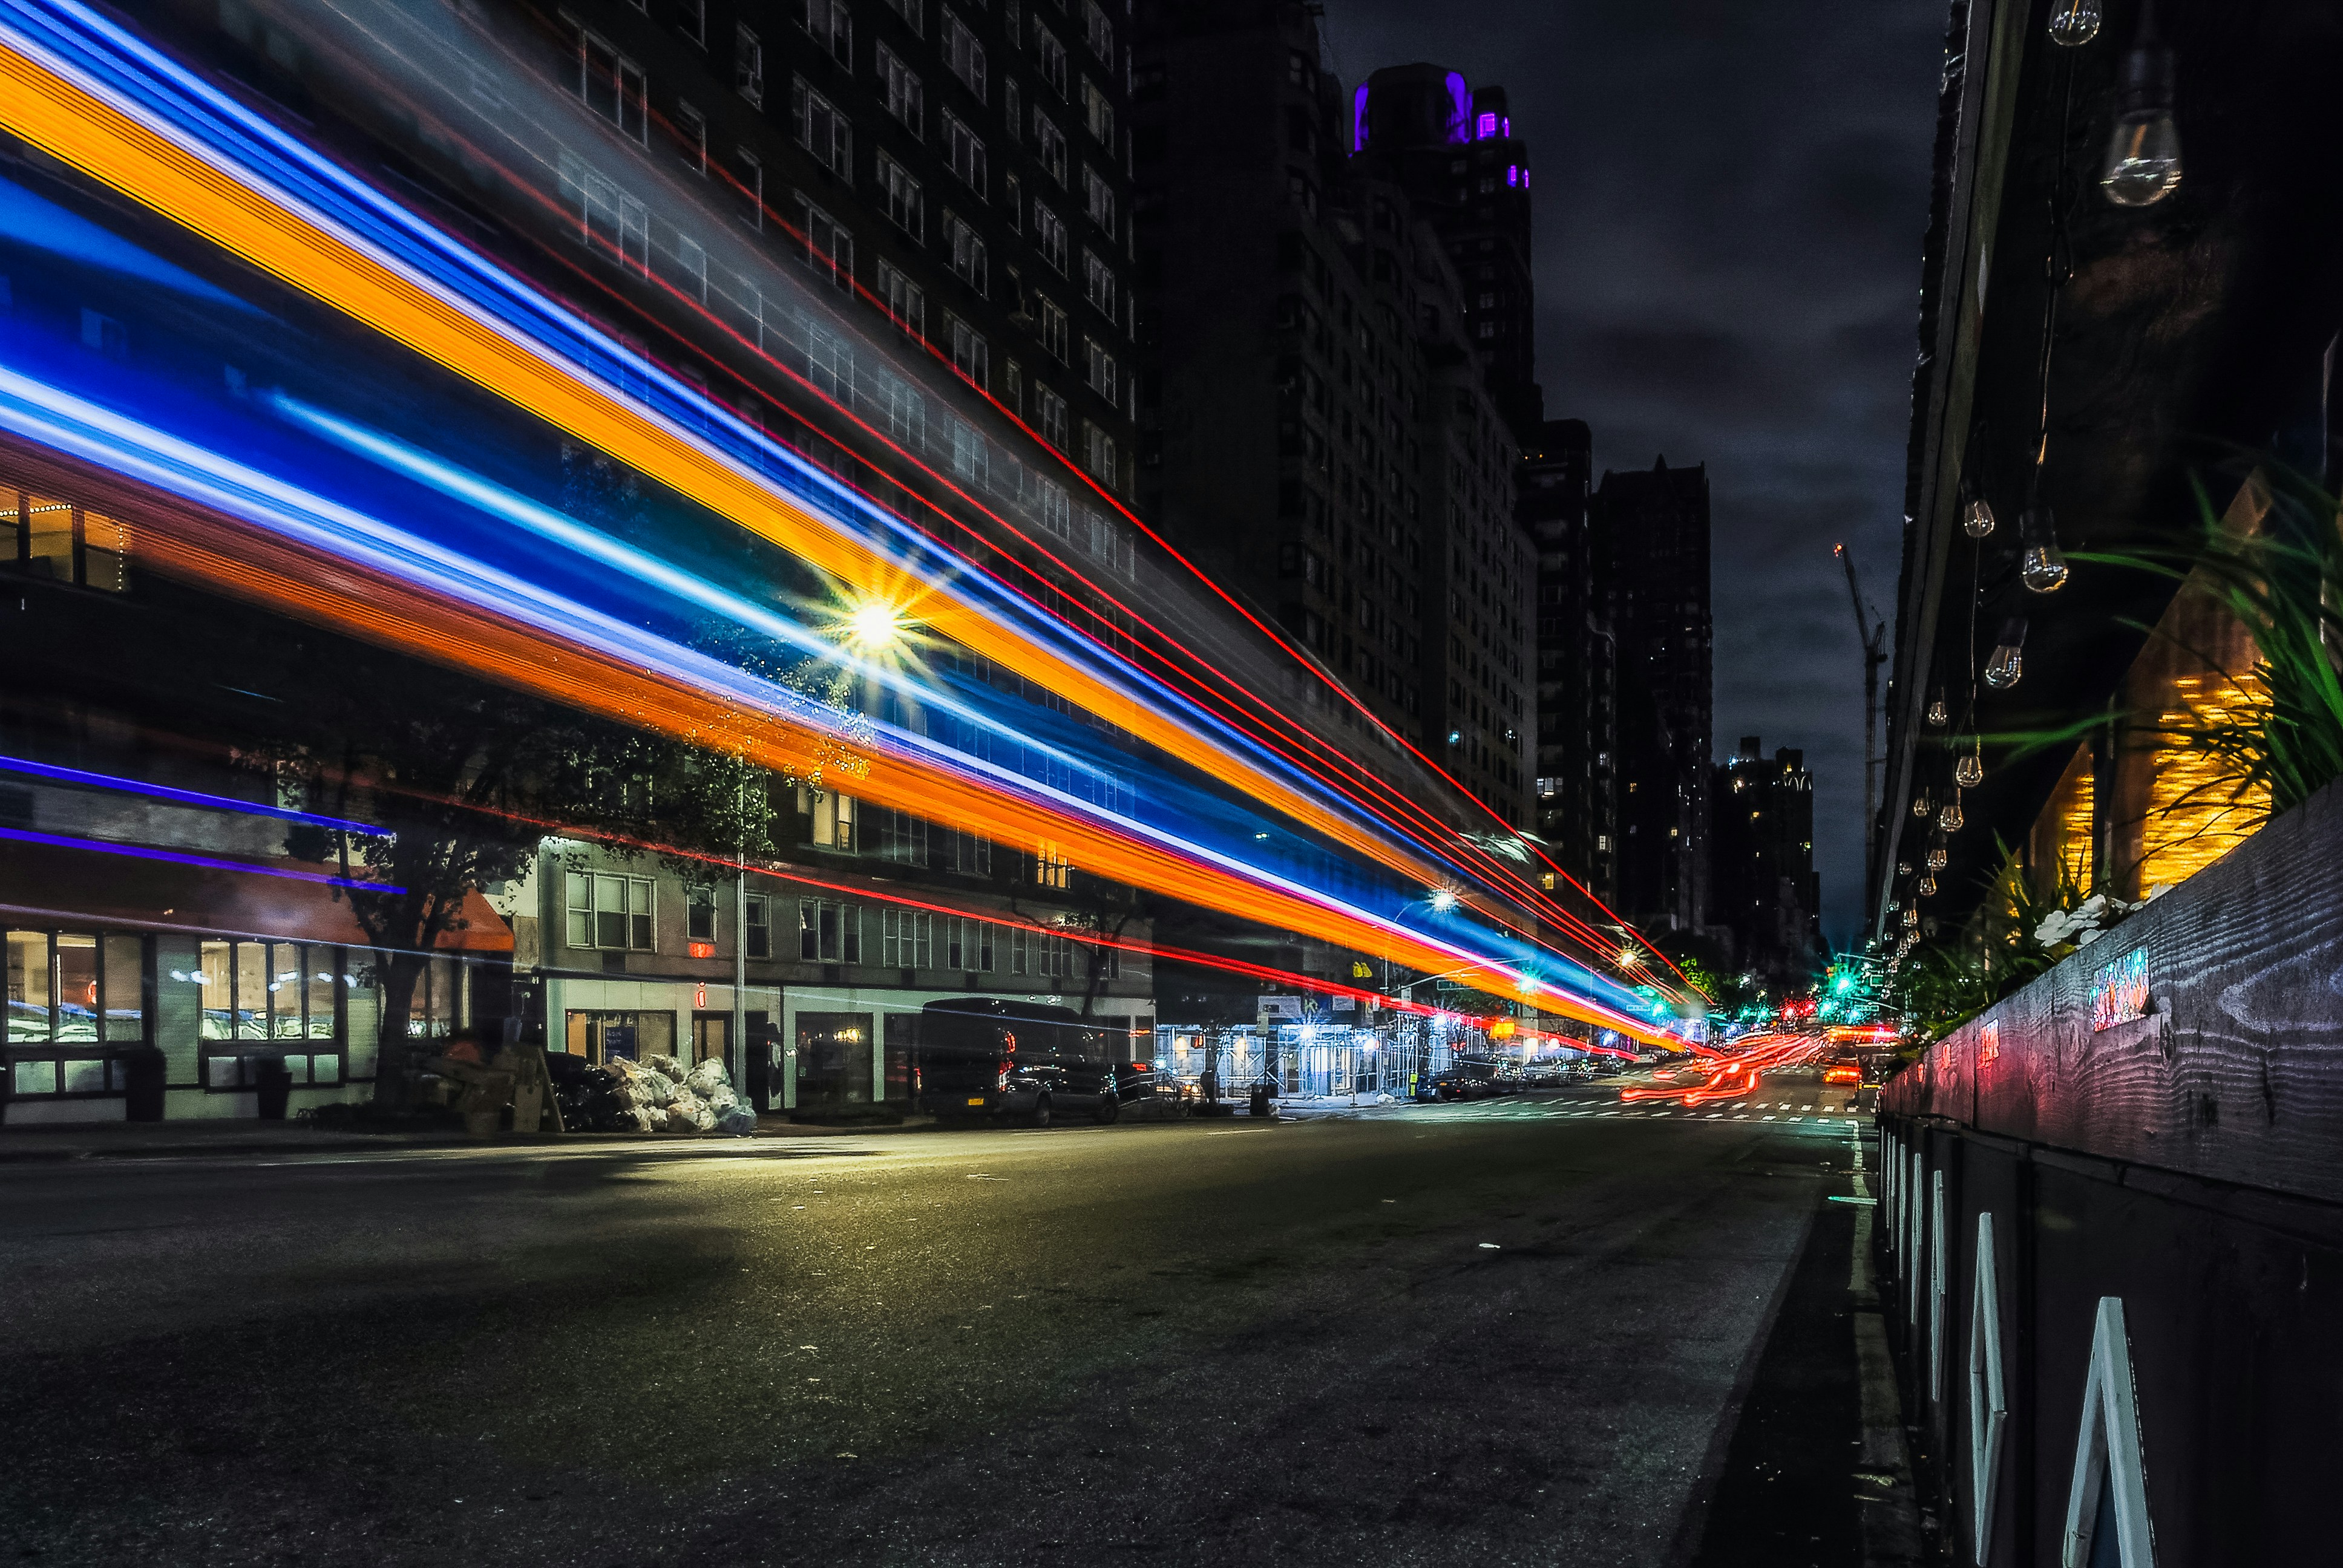 Long exposure of a bus streaking uptown on a deserted 3rd avenue at 3am in the middle of the night.